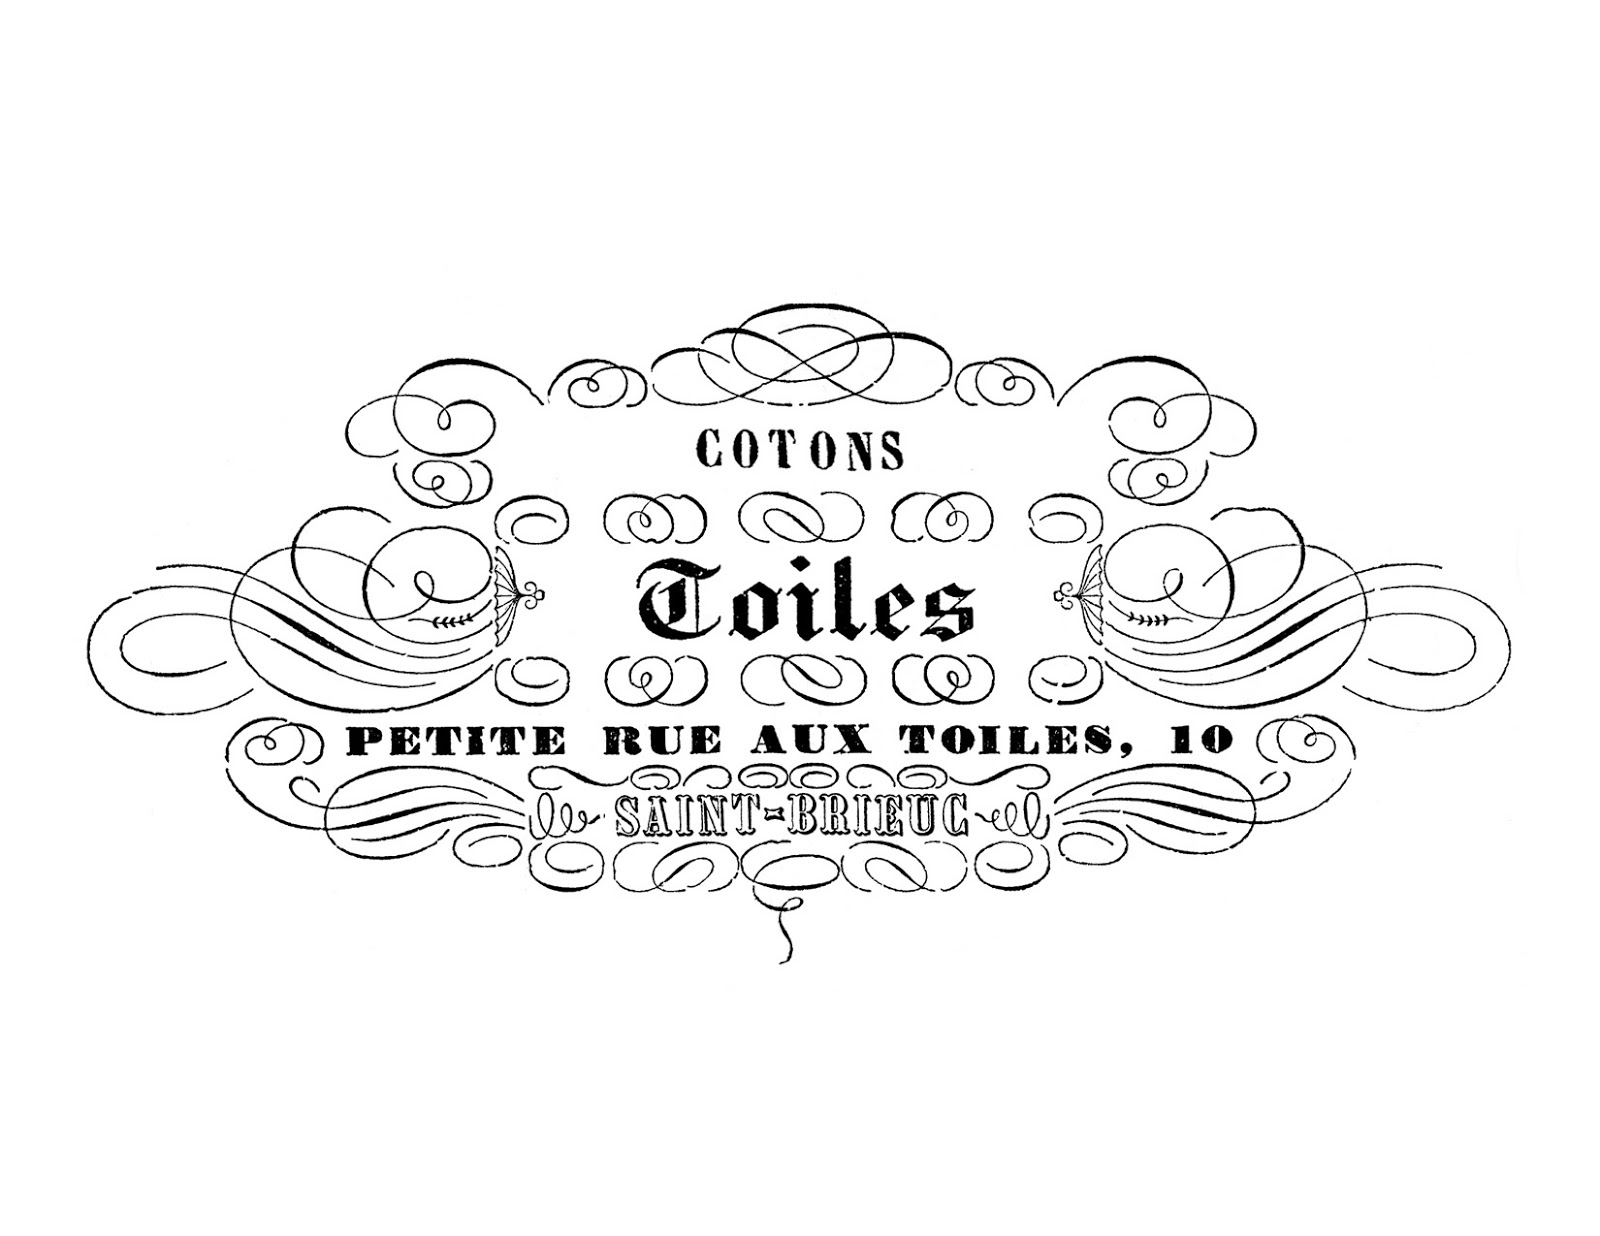 http://thegraphicsfairy.com/image-transfer-printable-french-toiles/